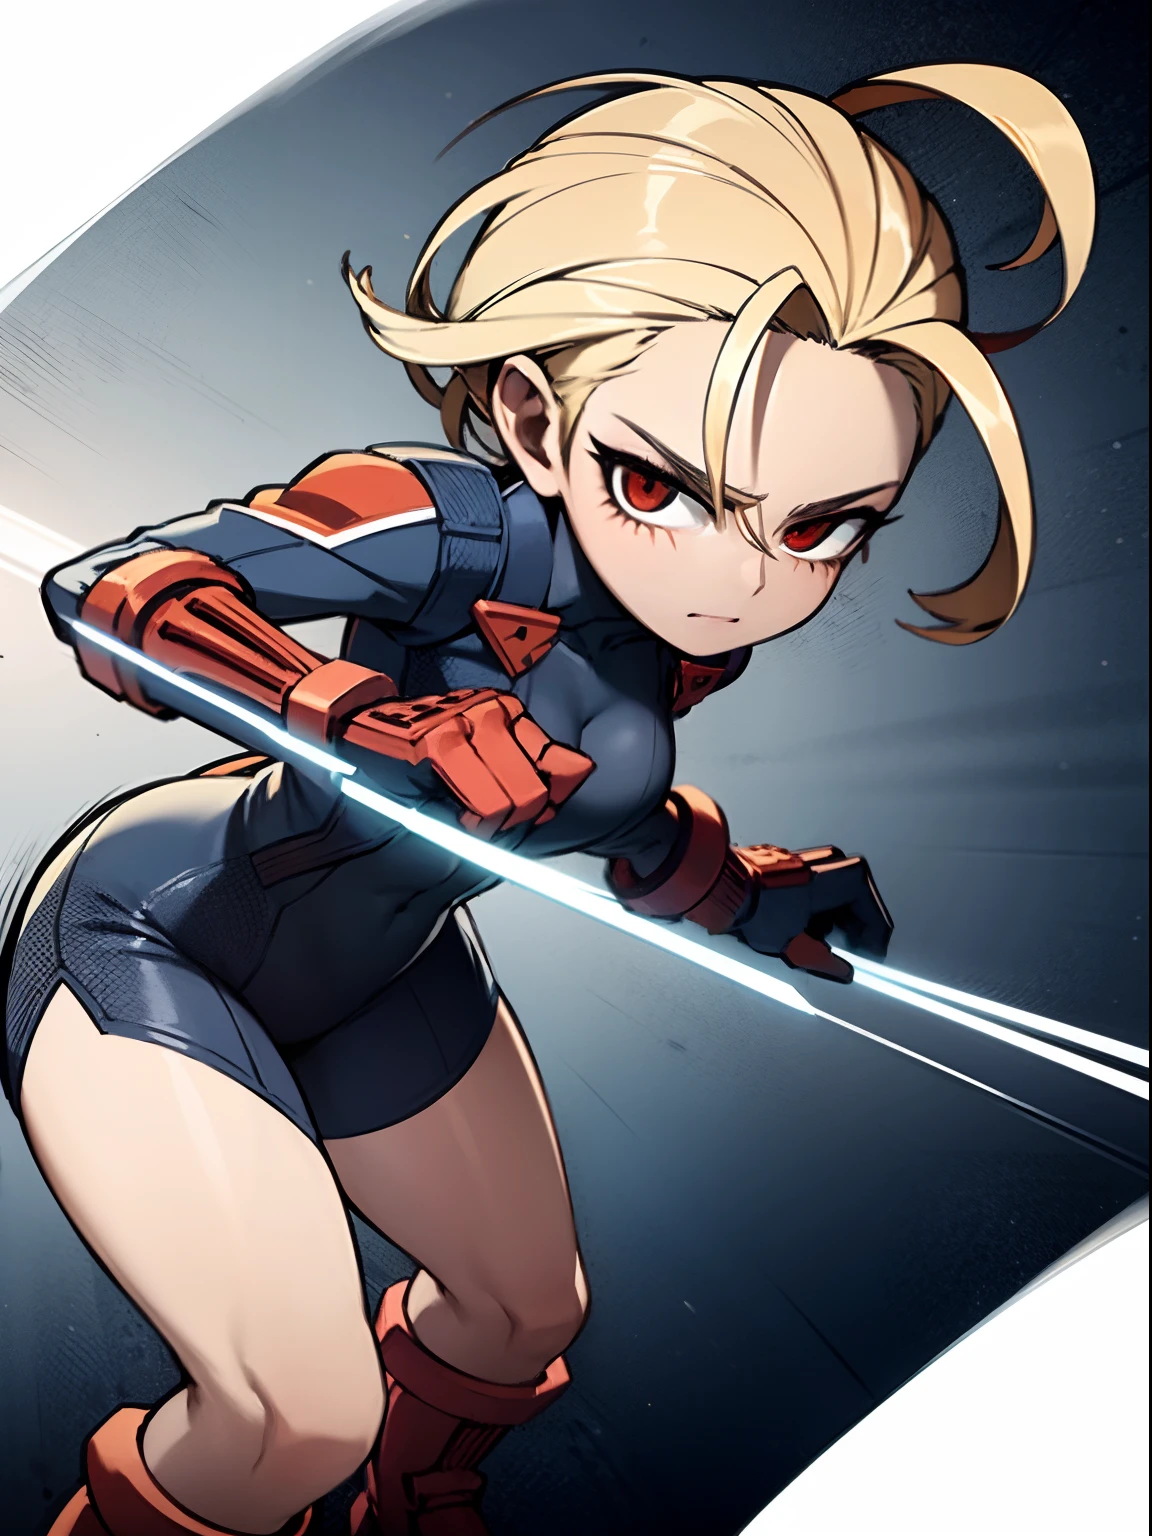 A woman in a military outfit stands in front of an airplane, Cammy, fighting game character, struggling posedor, in fighter poses, pose, posing for a fight intricate, posture of fight, struggling pose, struggling pose, powerful posture, posing ready for a fight, intimidating pose, Combat posture, Street Fighter